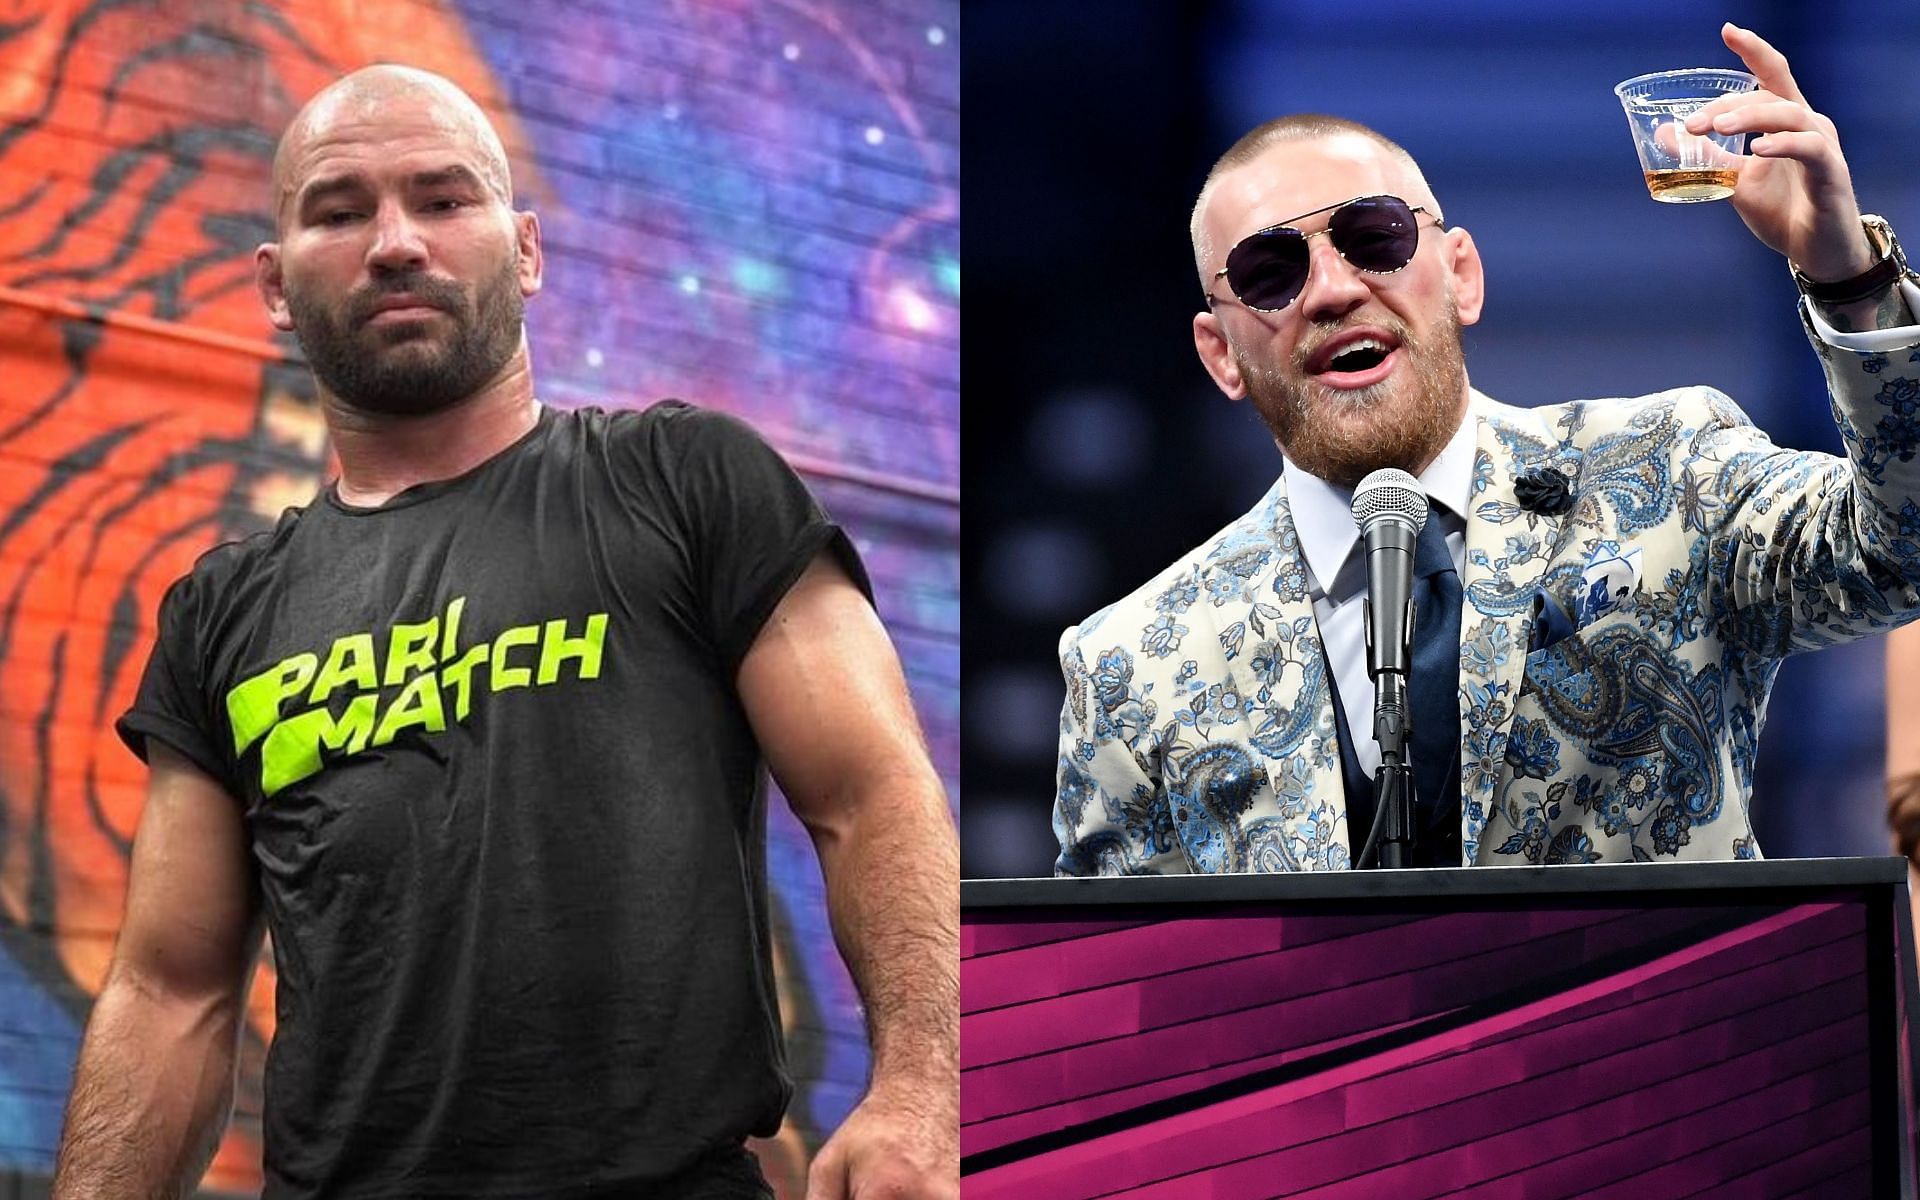 Artem Lobov (left) and Conor McGregor (right) (Images via Instagram/RuHammer and Getty)